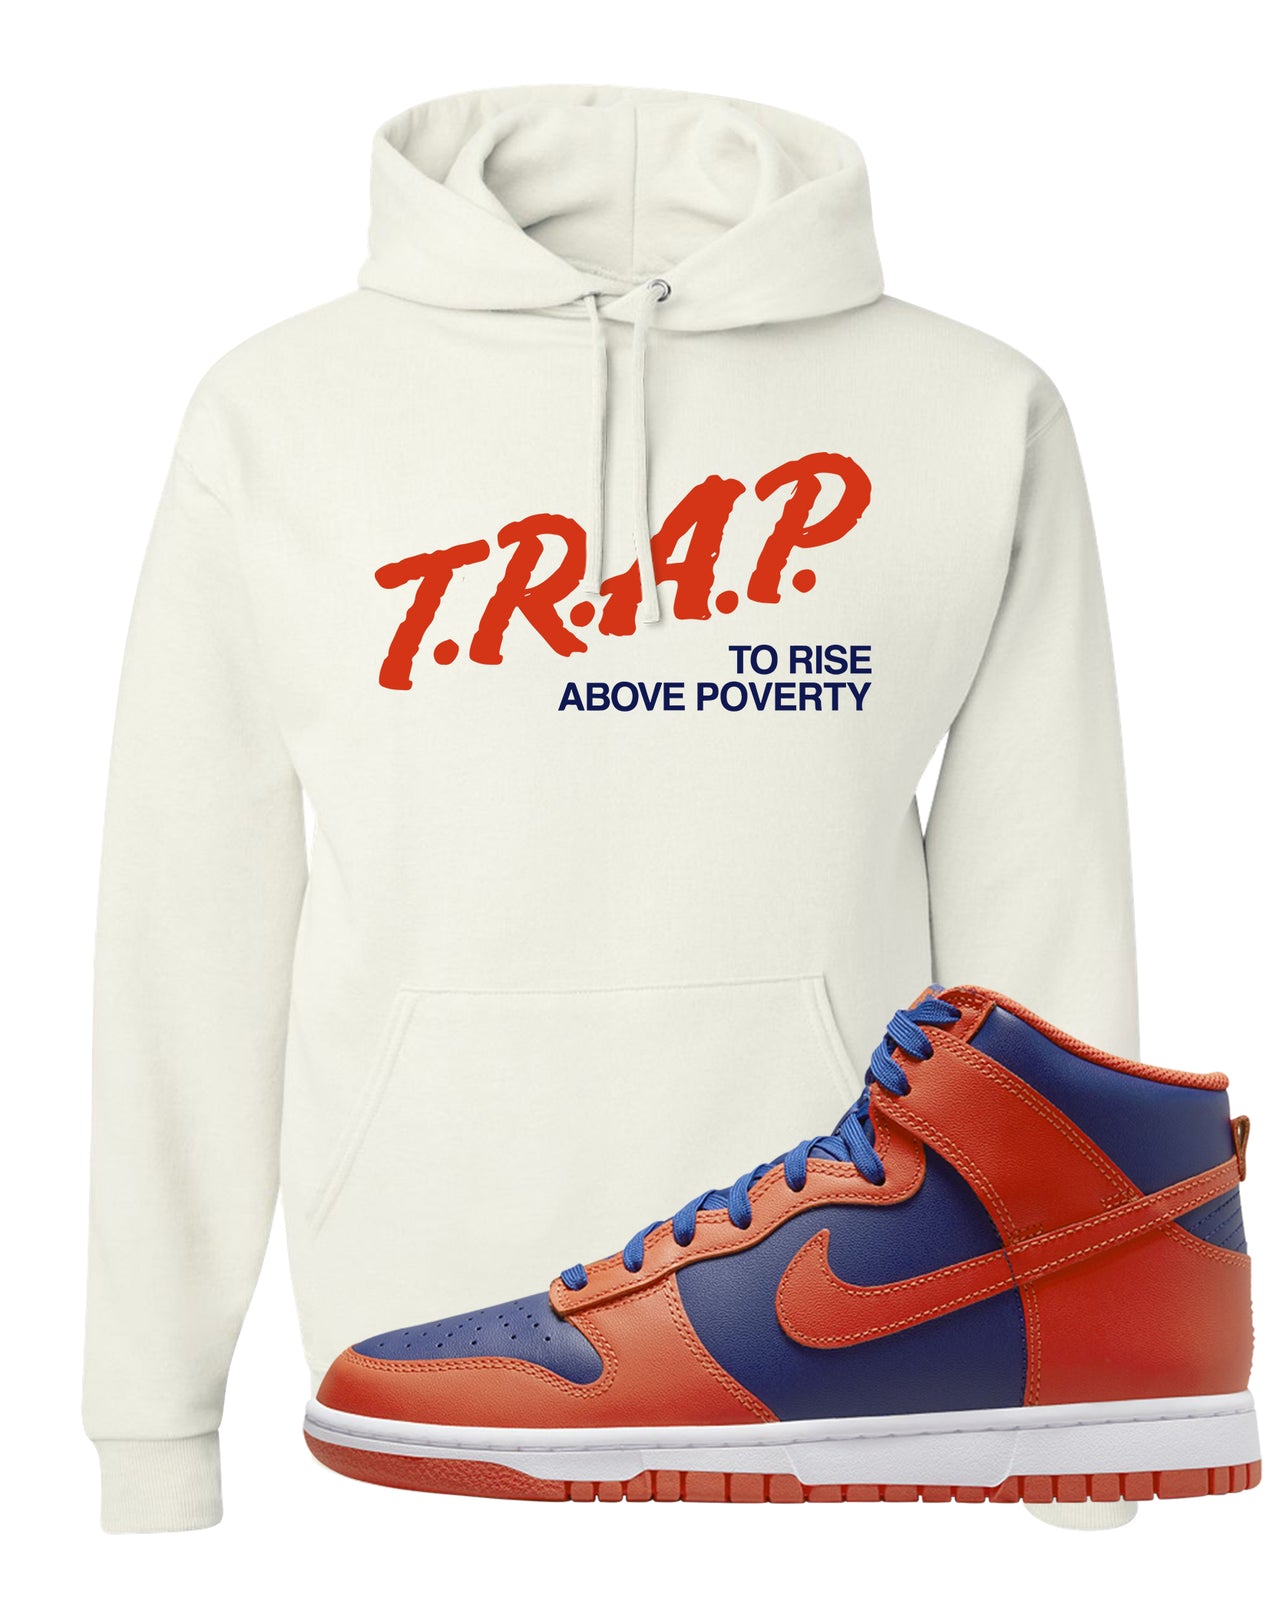 Orange Deep Royal High Dunks Hoodie | Trap To Rise Above Poverty, White